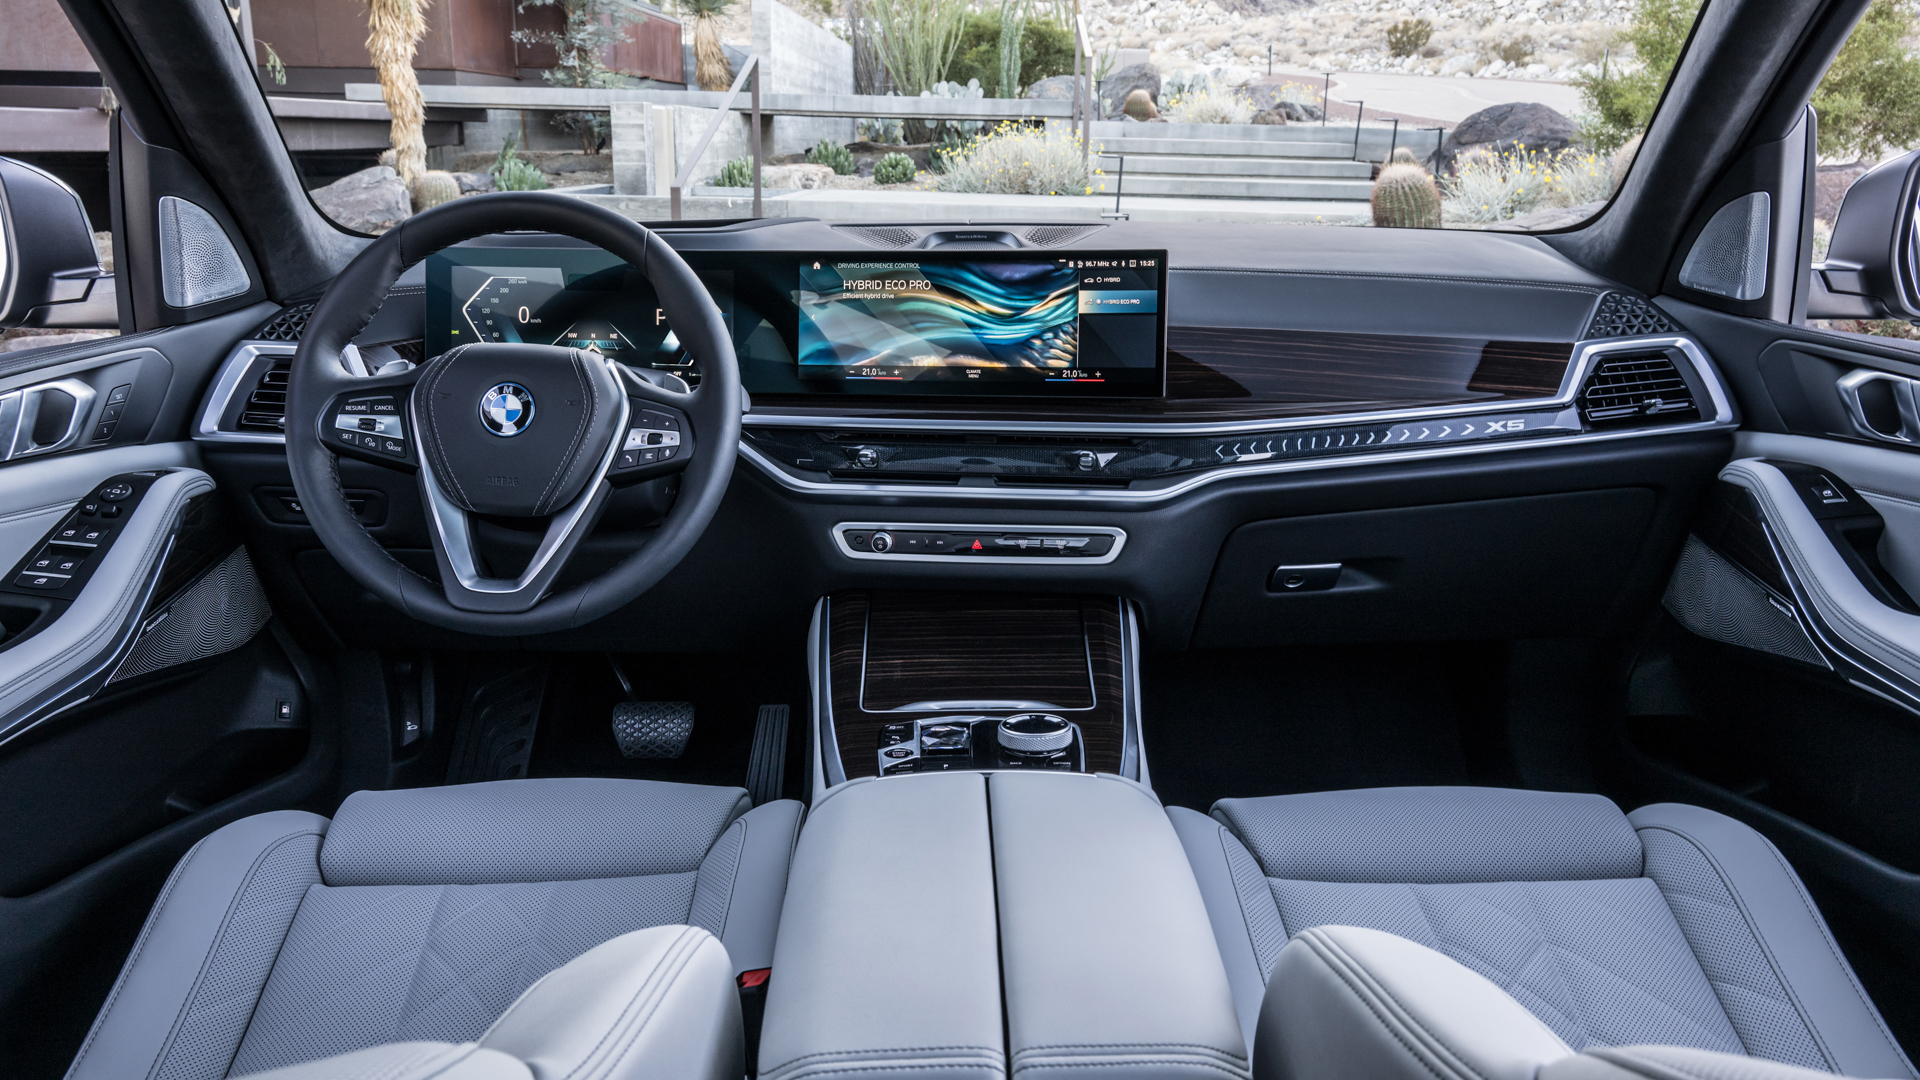 BMW Is Giving Up on Heated Seat Subscriptions Because People Hated Them